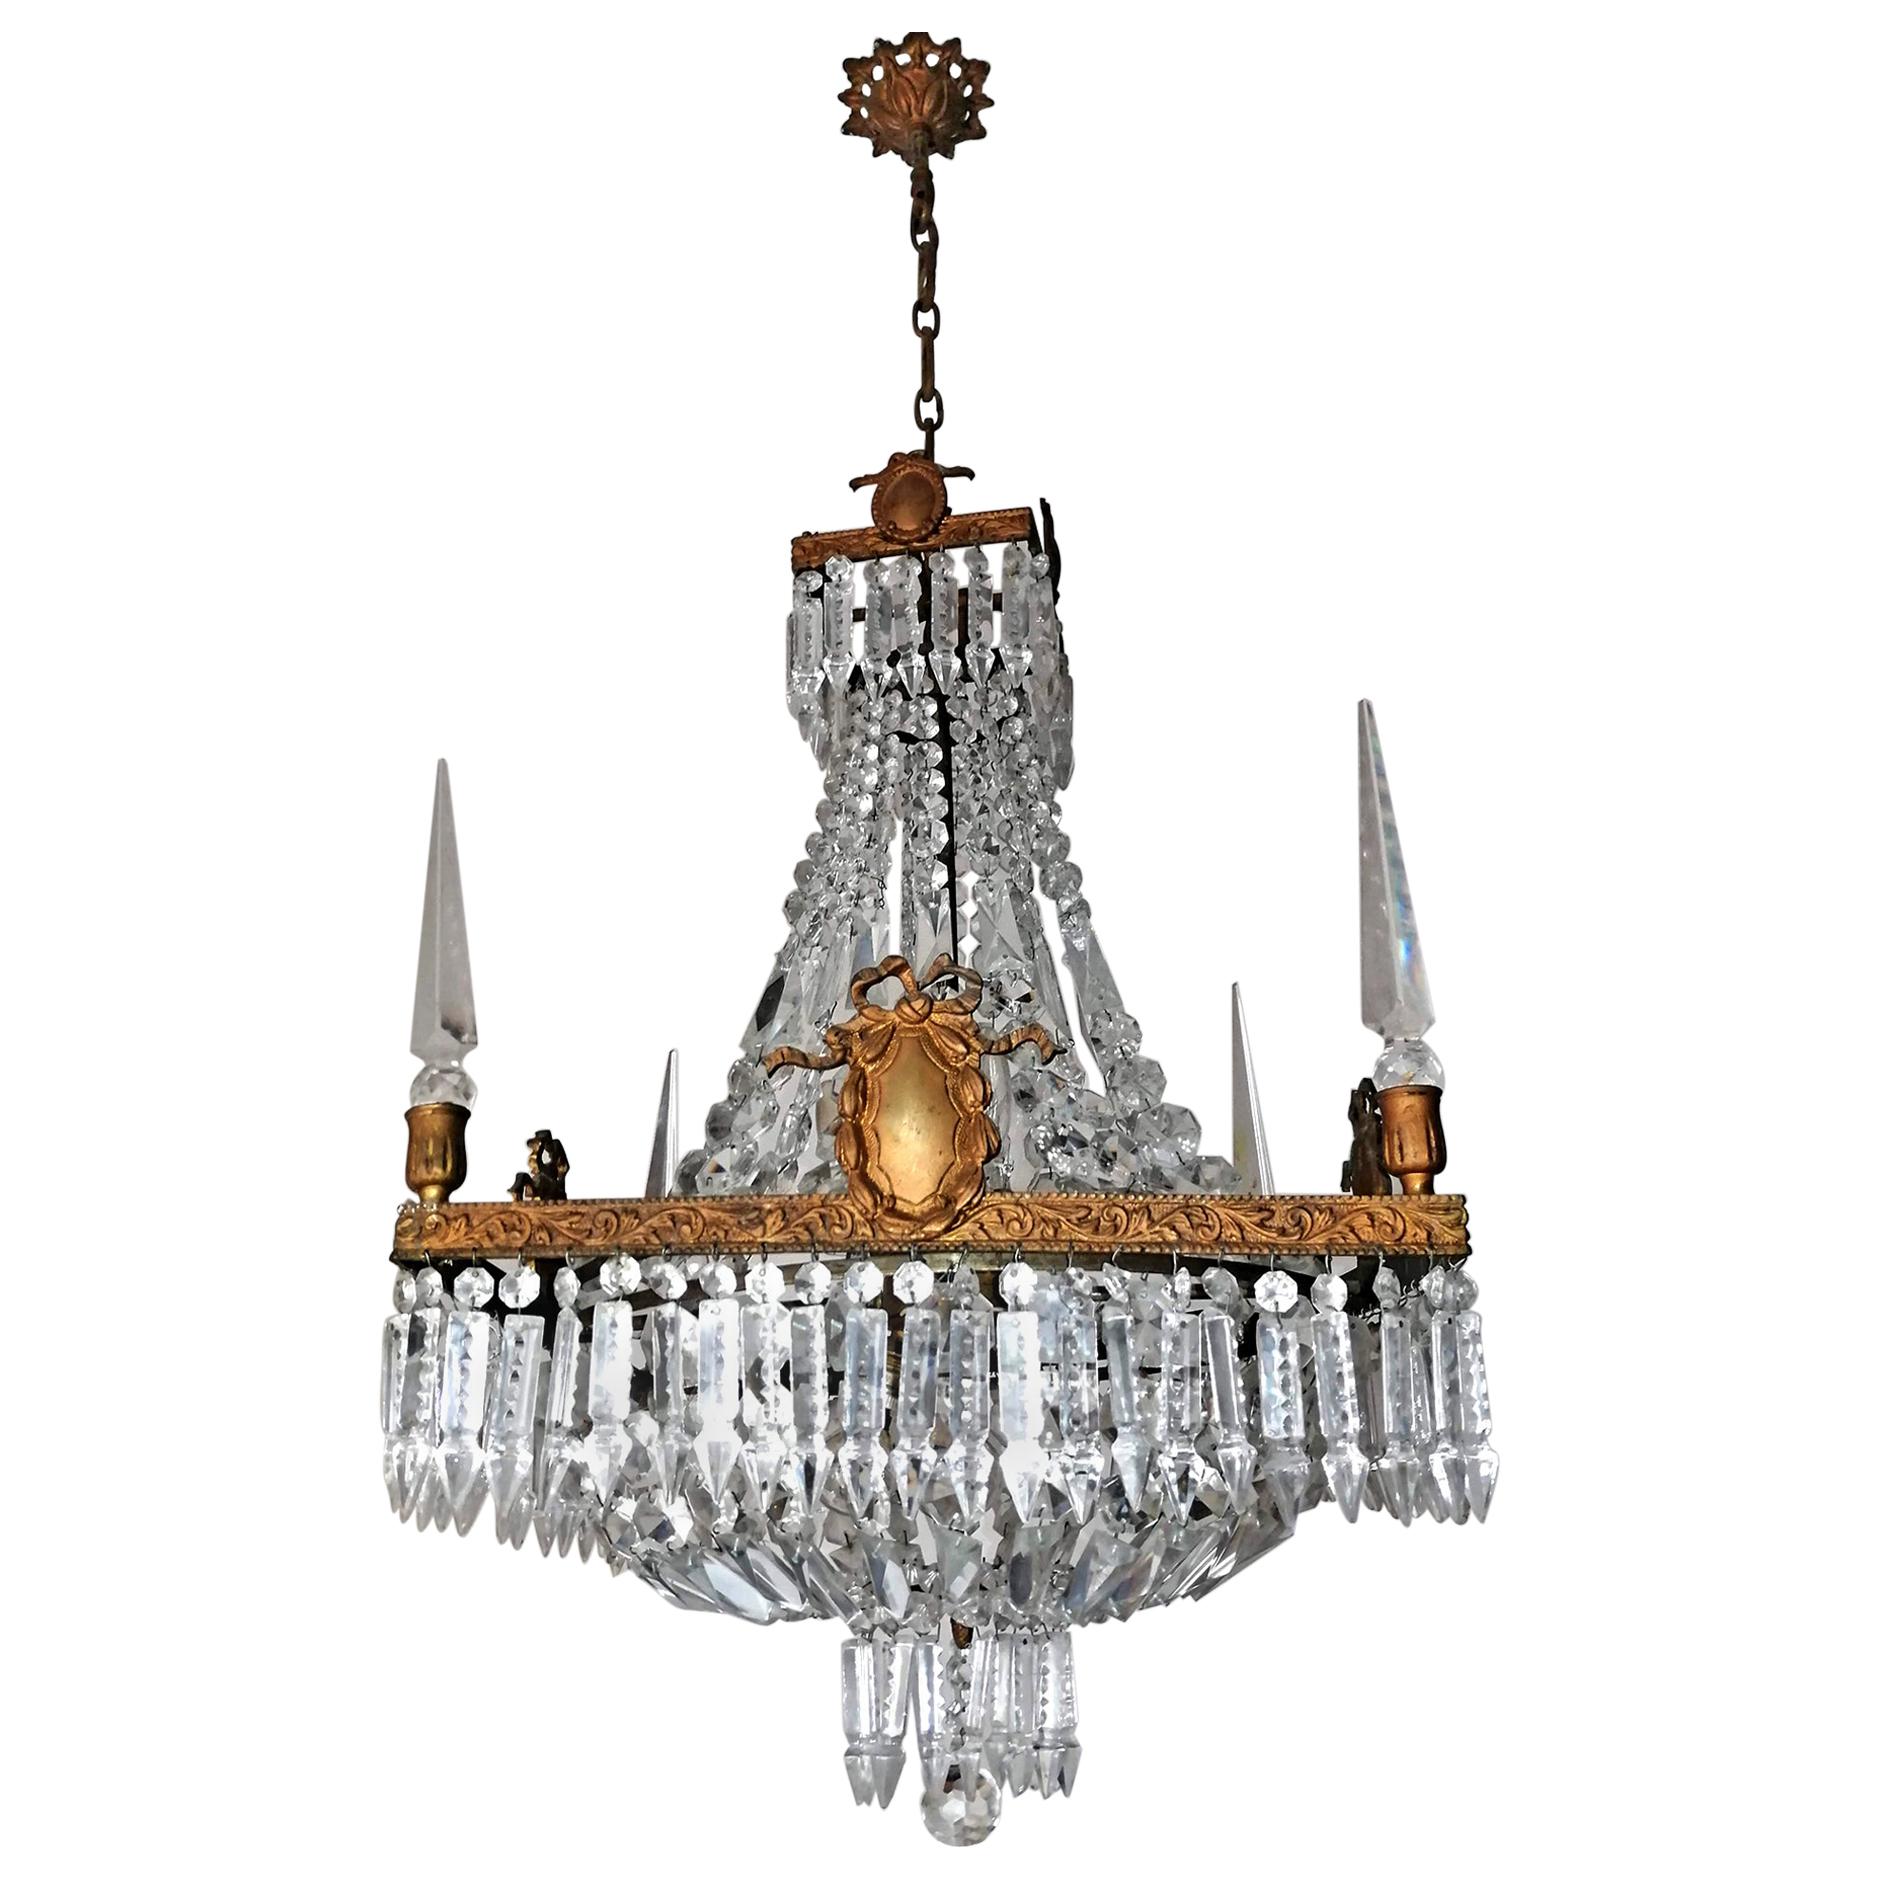 7-light French Empire pure crystal basket chandelier with gilt bronze frame and 4-faceted crystal obelisks, circa 1900s
Measures:
Depth, 17.7 in/ 45 cm
Width, 17.7 in/ 45 cm
Diameter 23.6 in/ 60 cm
Height 47.2in/ 11.8 in chain (120 cm /30 cm